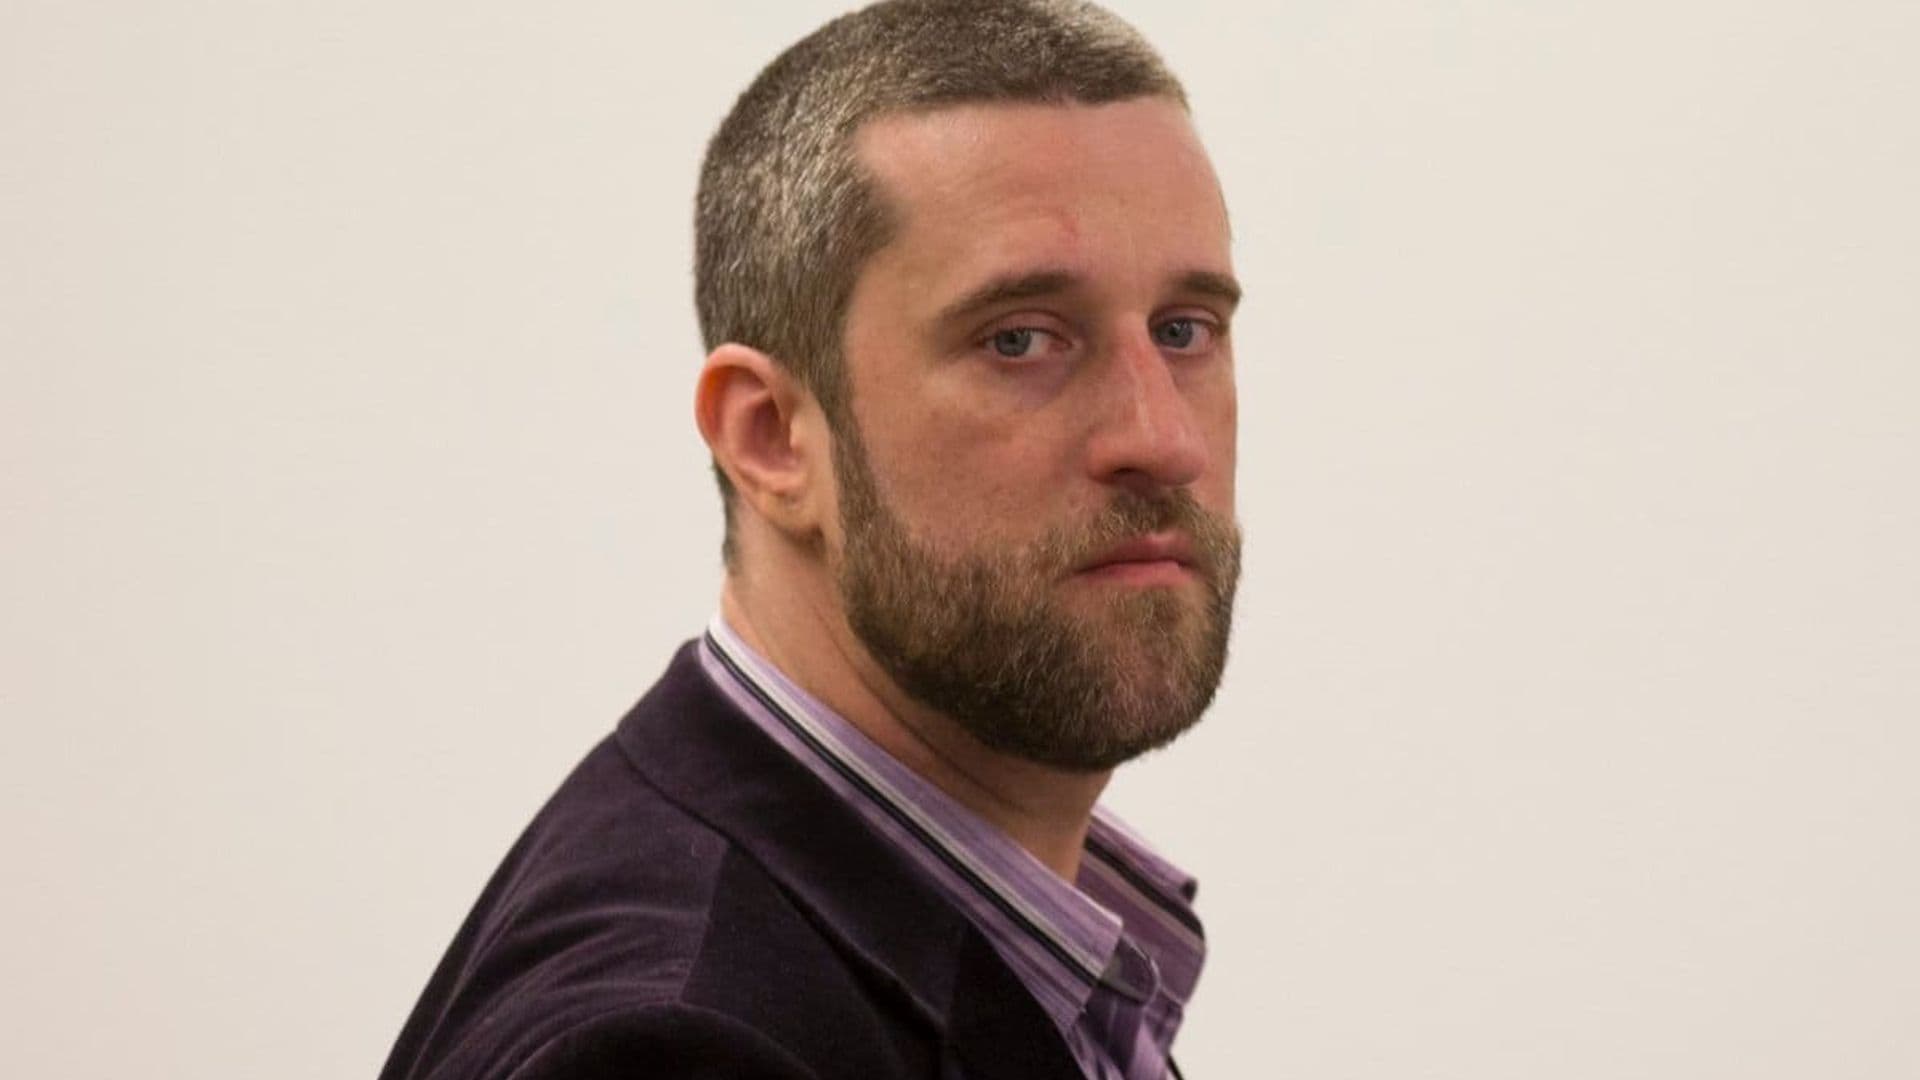 ‘Saved by the Bell’ star Dustin Diamond is diagnosed with stage 4 cancer